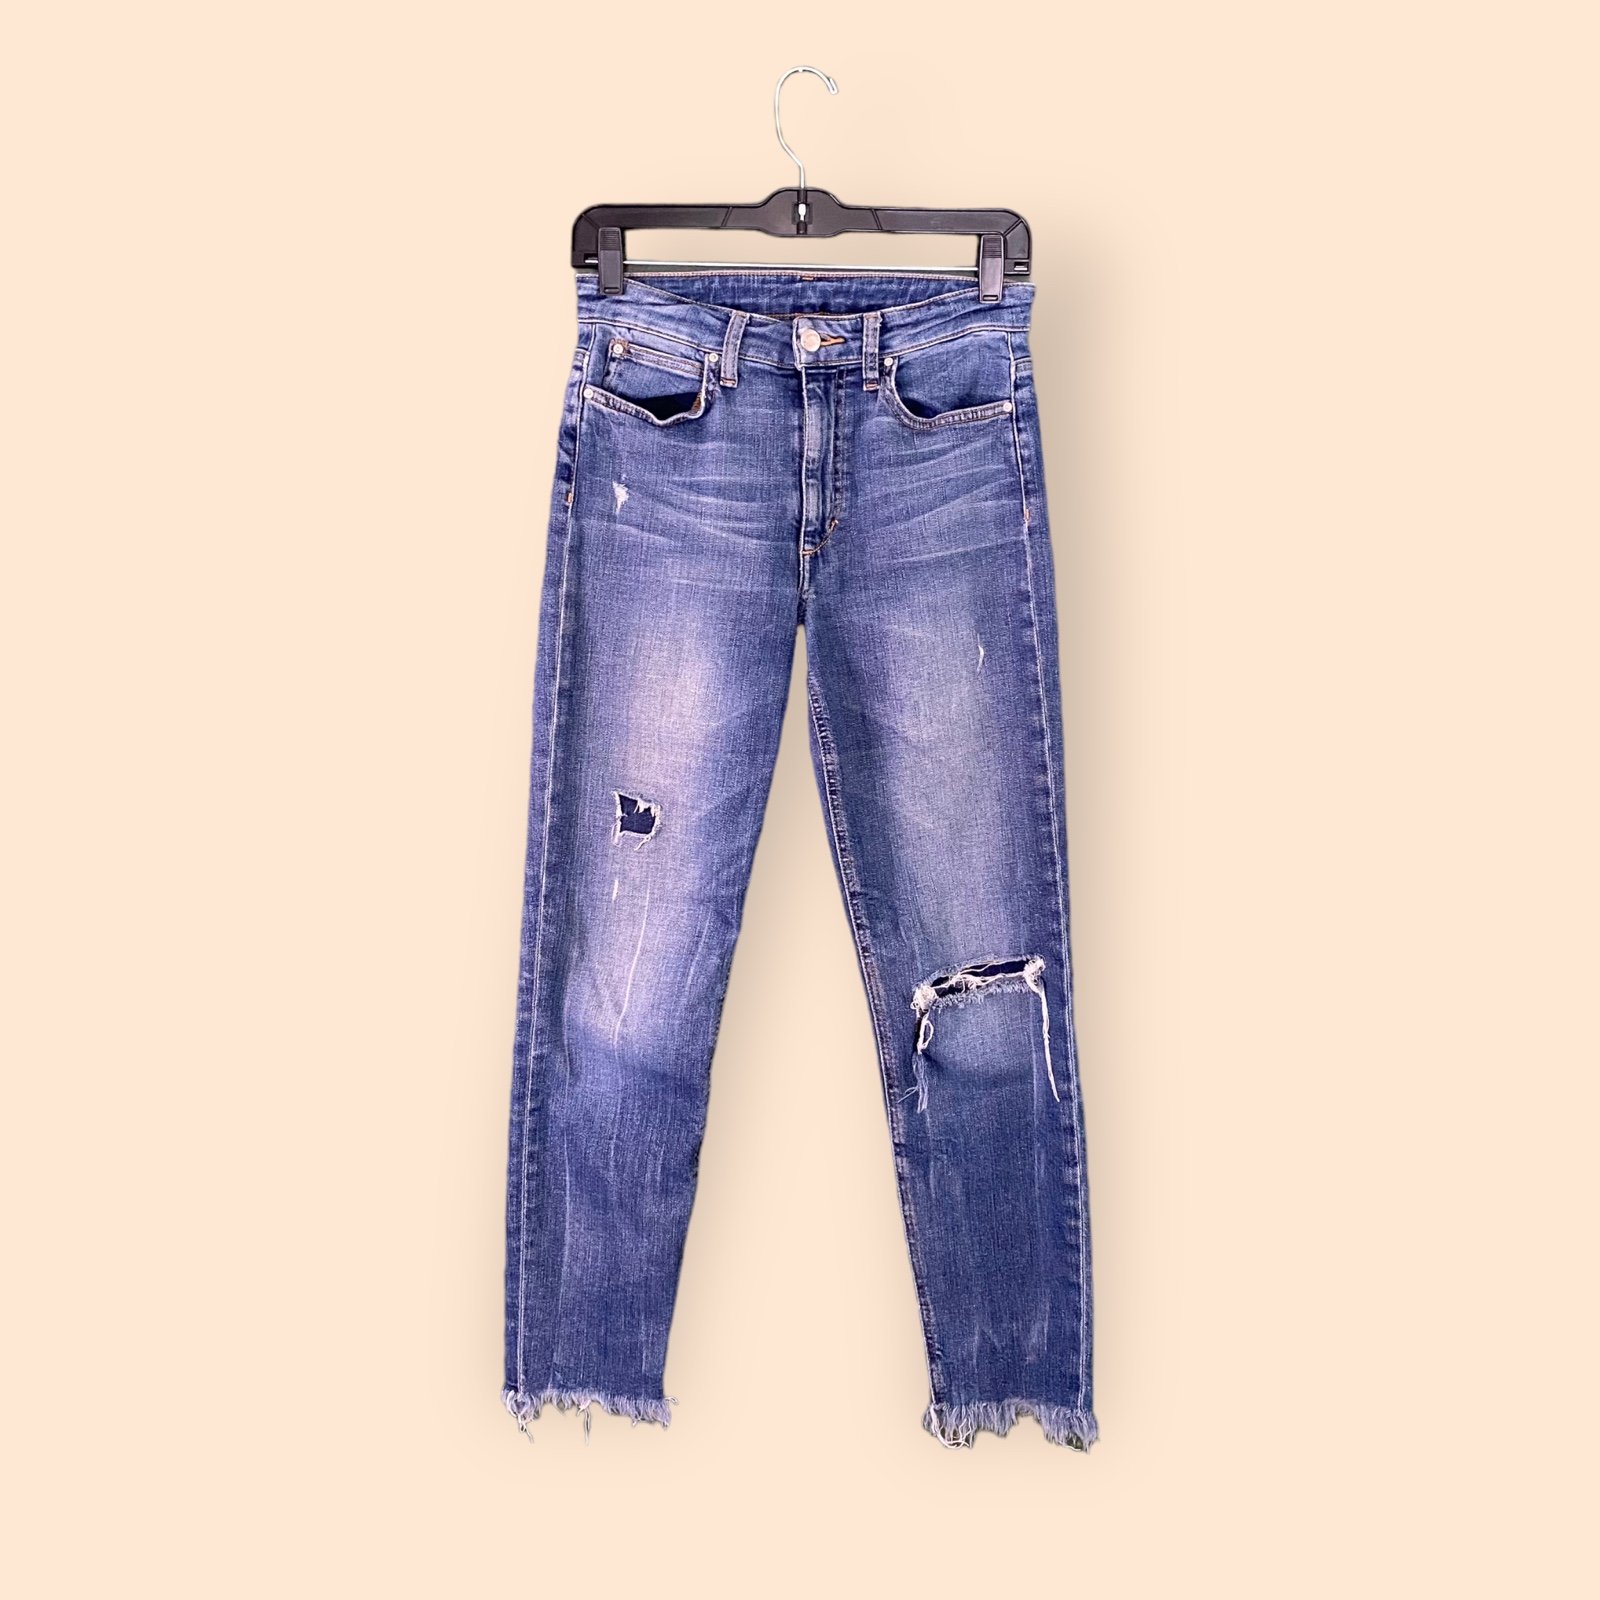 Comfortable Joes Jeans the Charlie cropped skinny lviby